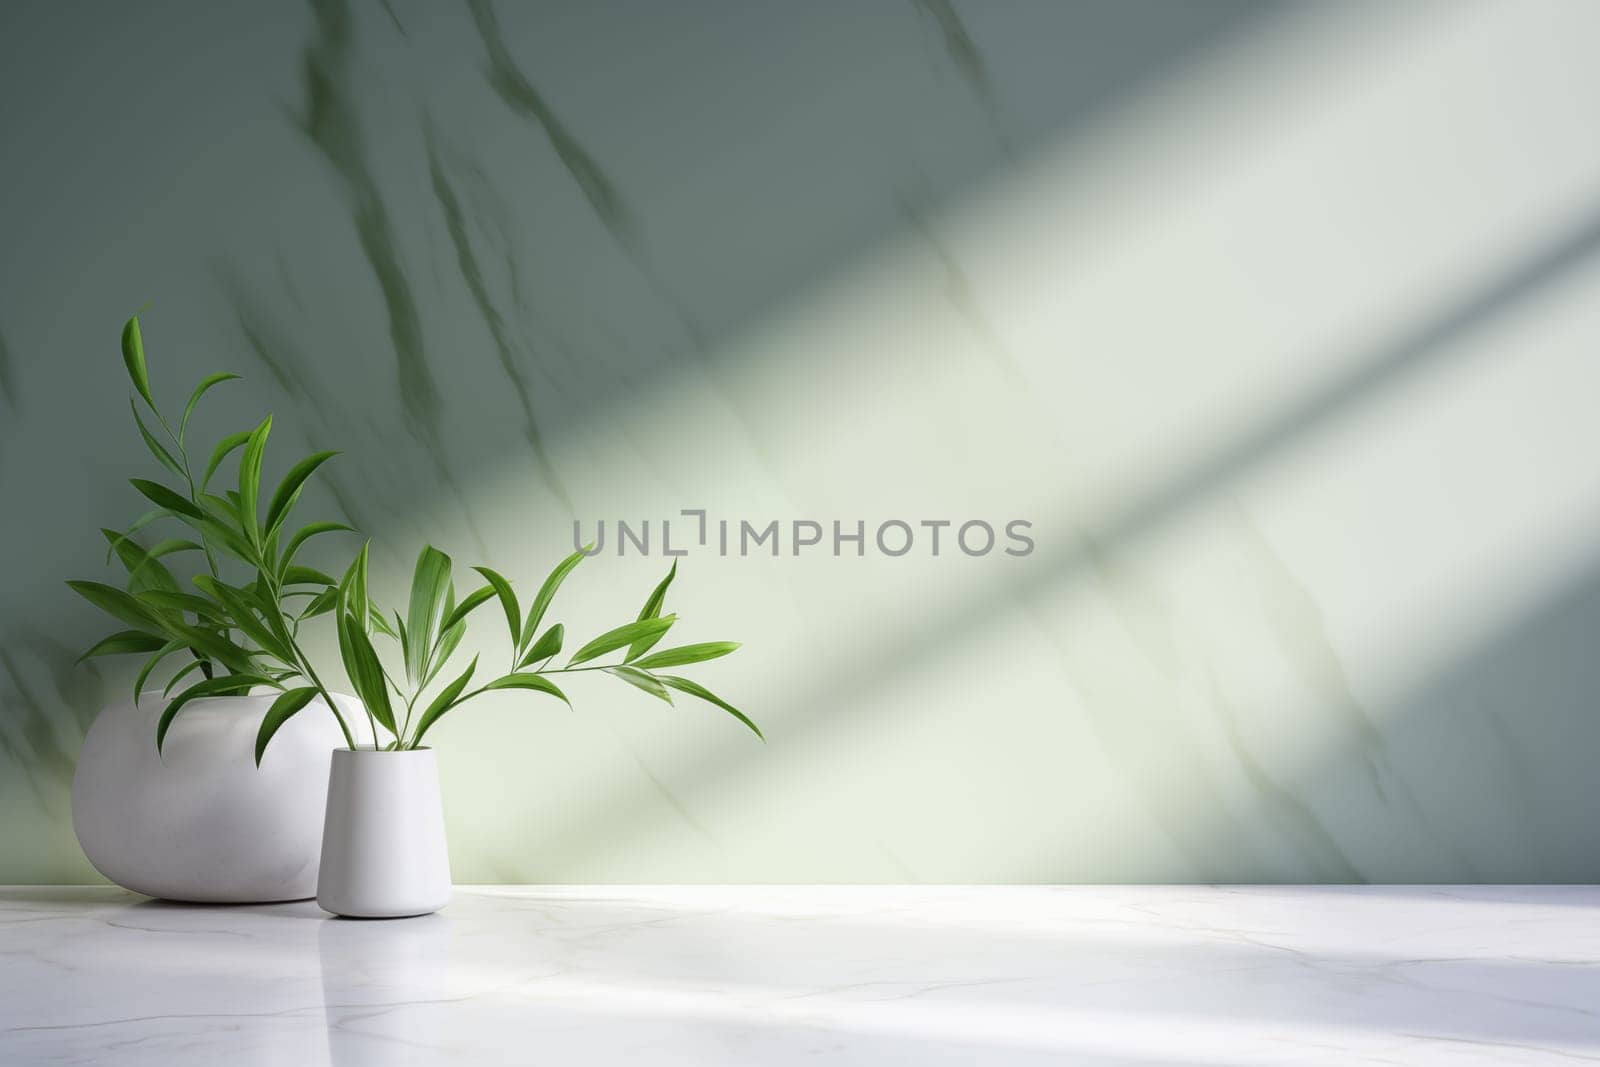 Minimalistic light background with blurred foliage shadow on a light wall. Beautiful background for presentation with with marble floor. High quality photo